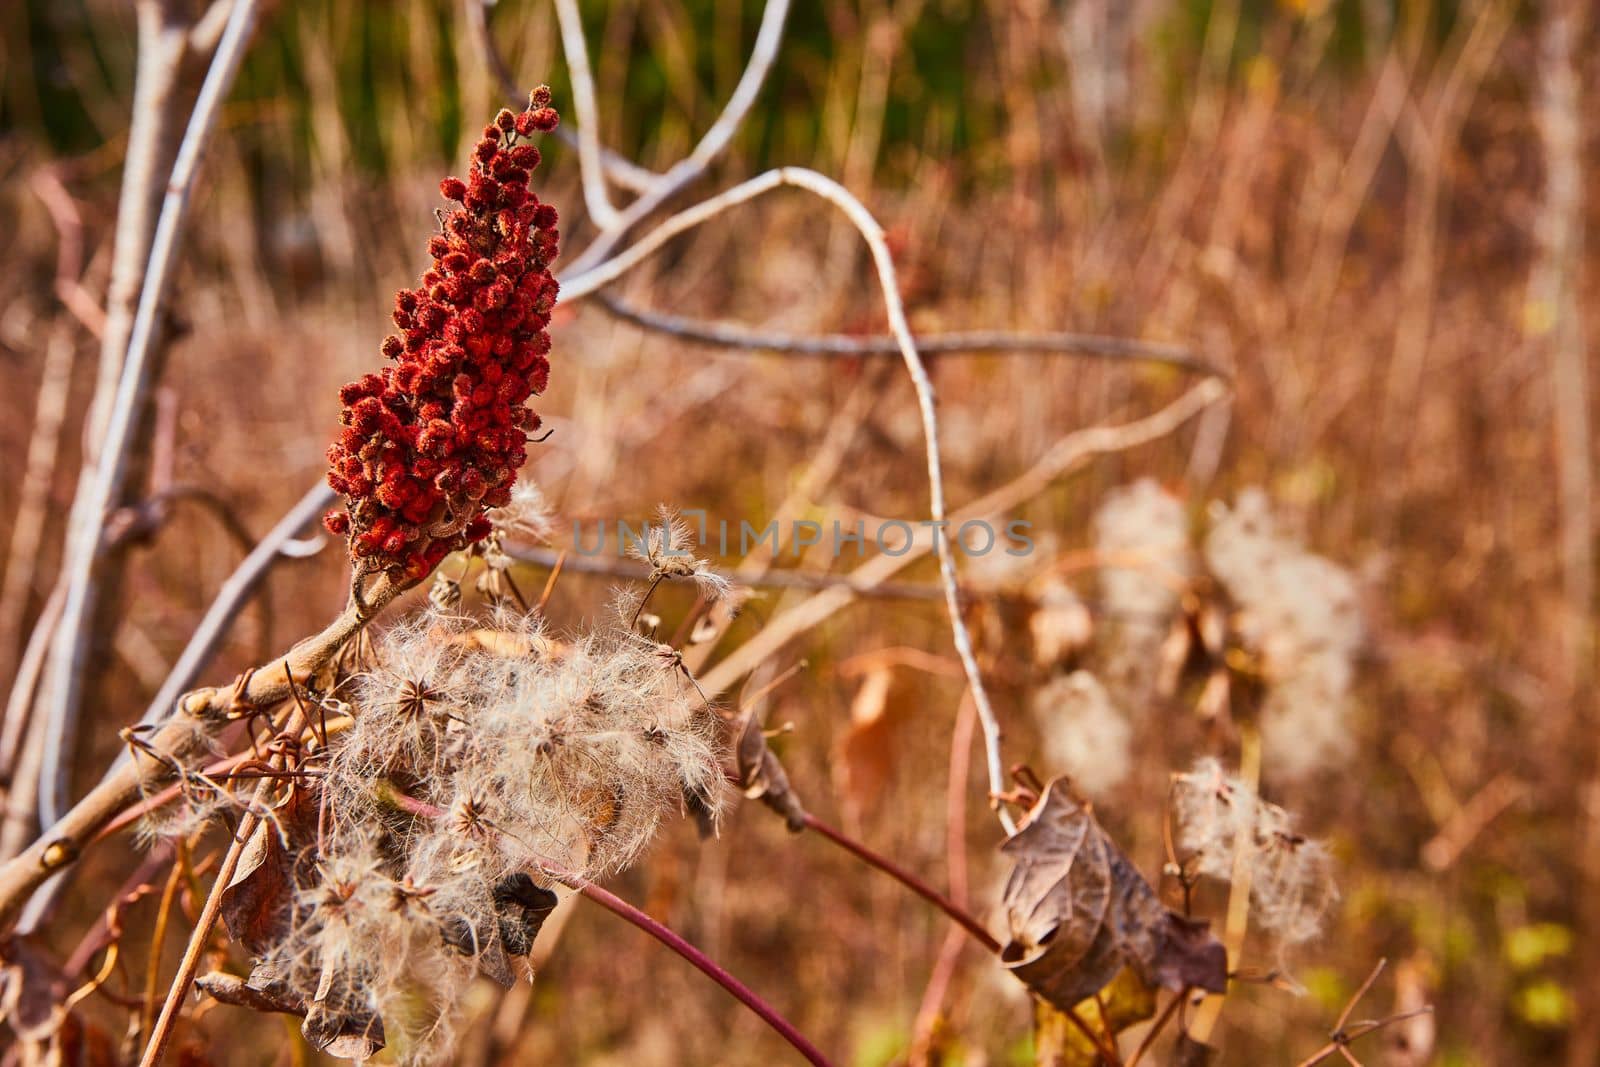 Image of Fields of Staghorn sumac and milkweed pods in fields of light brown